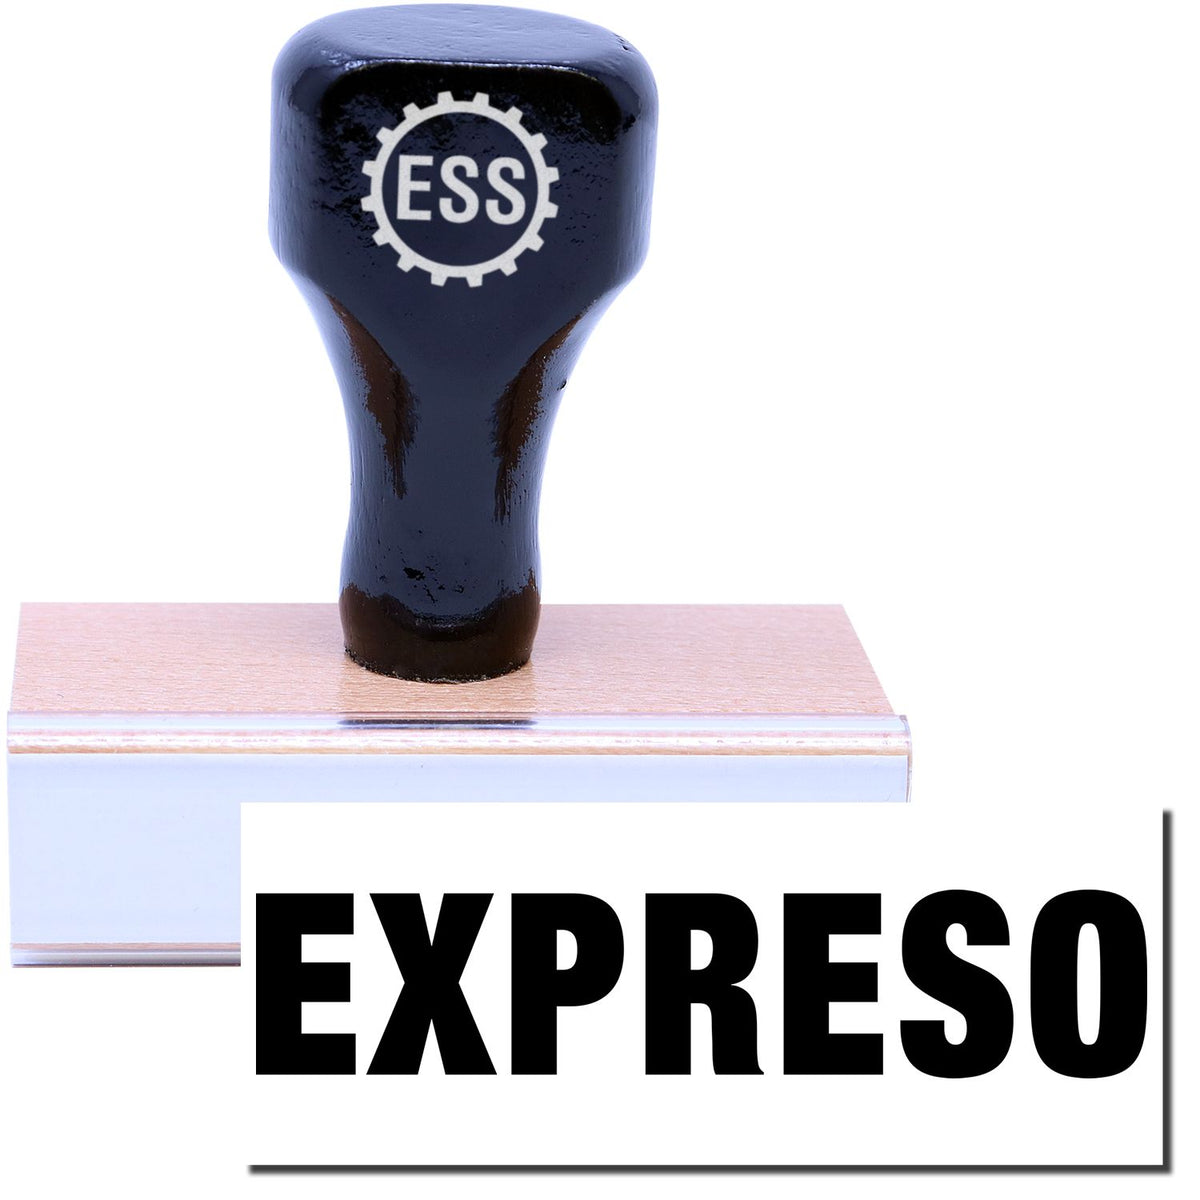 A stock office rubber stamp with a stamped image showing how the text &quot;EXPRESO&quot; is displayed after stamping.